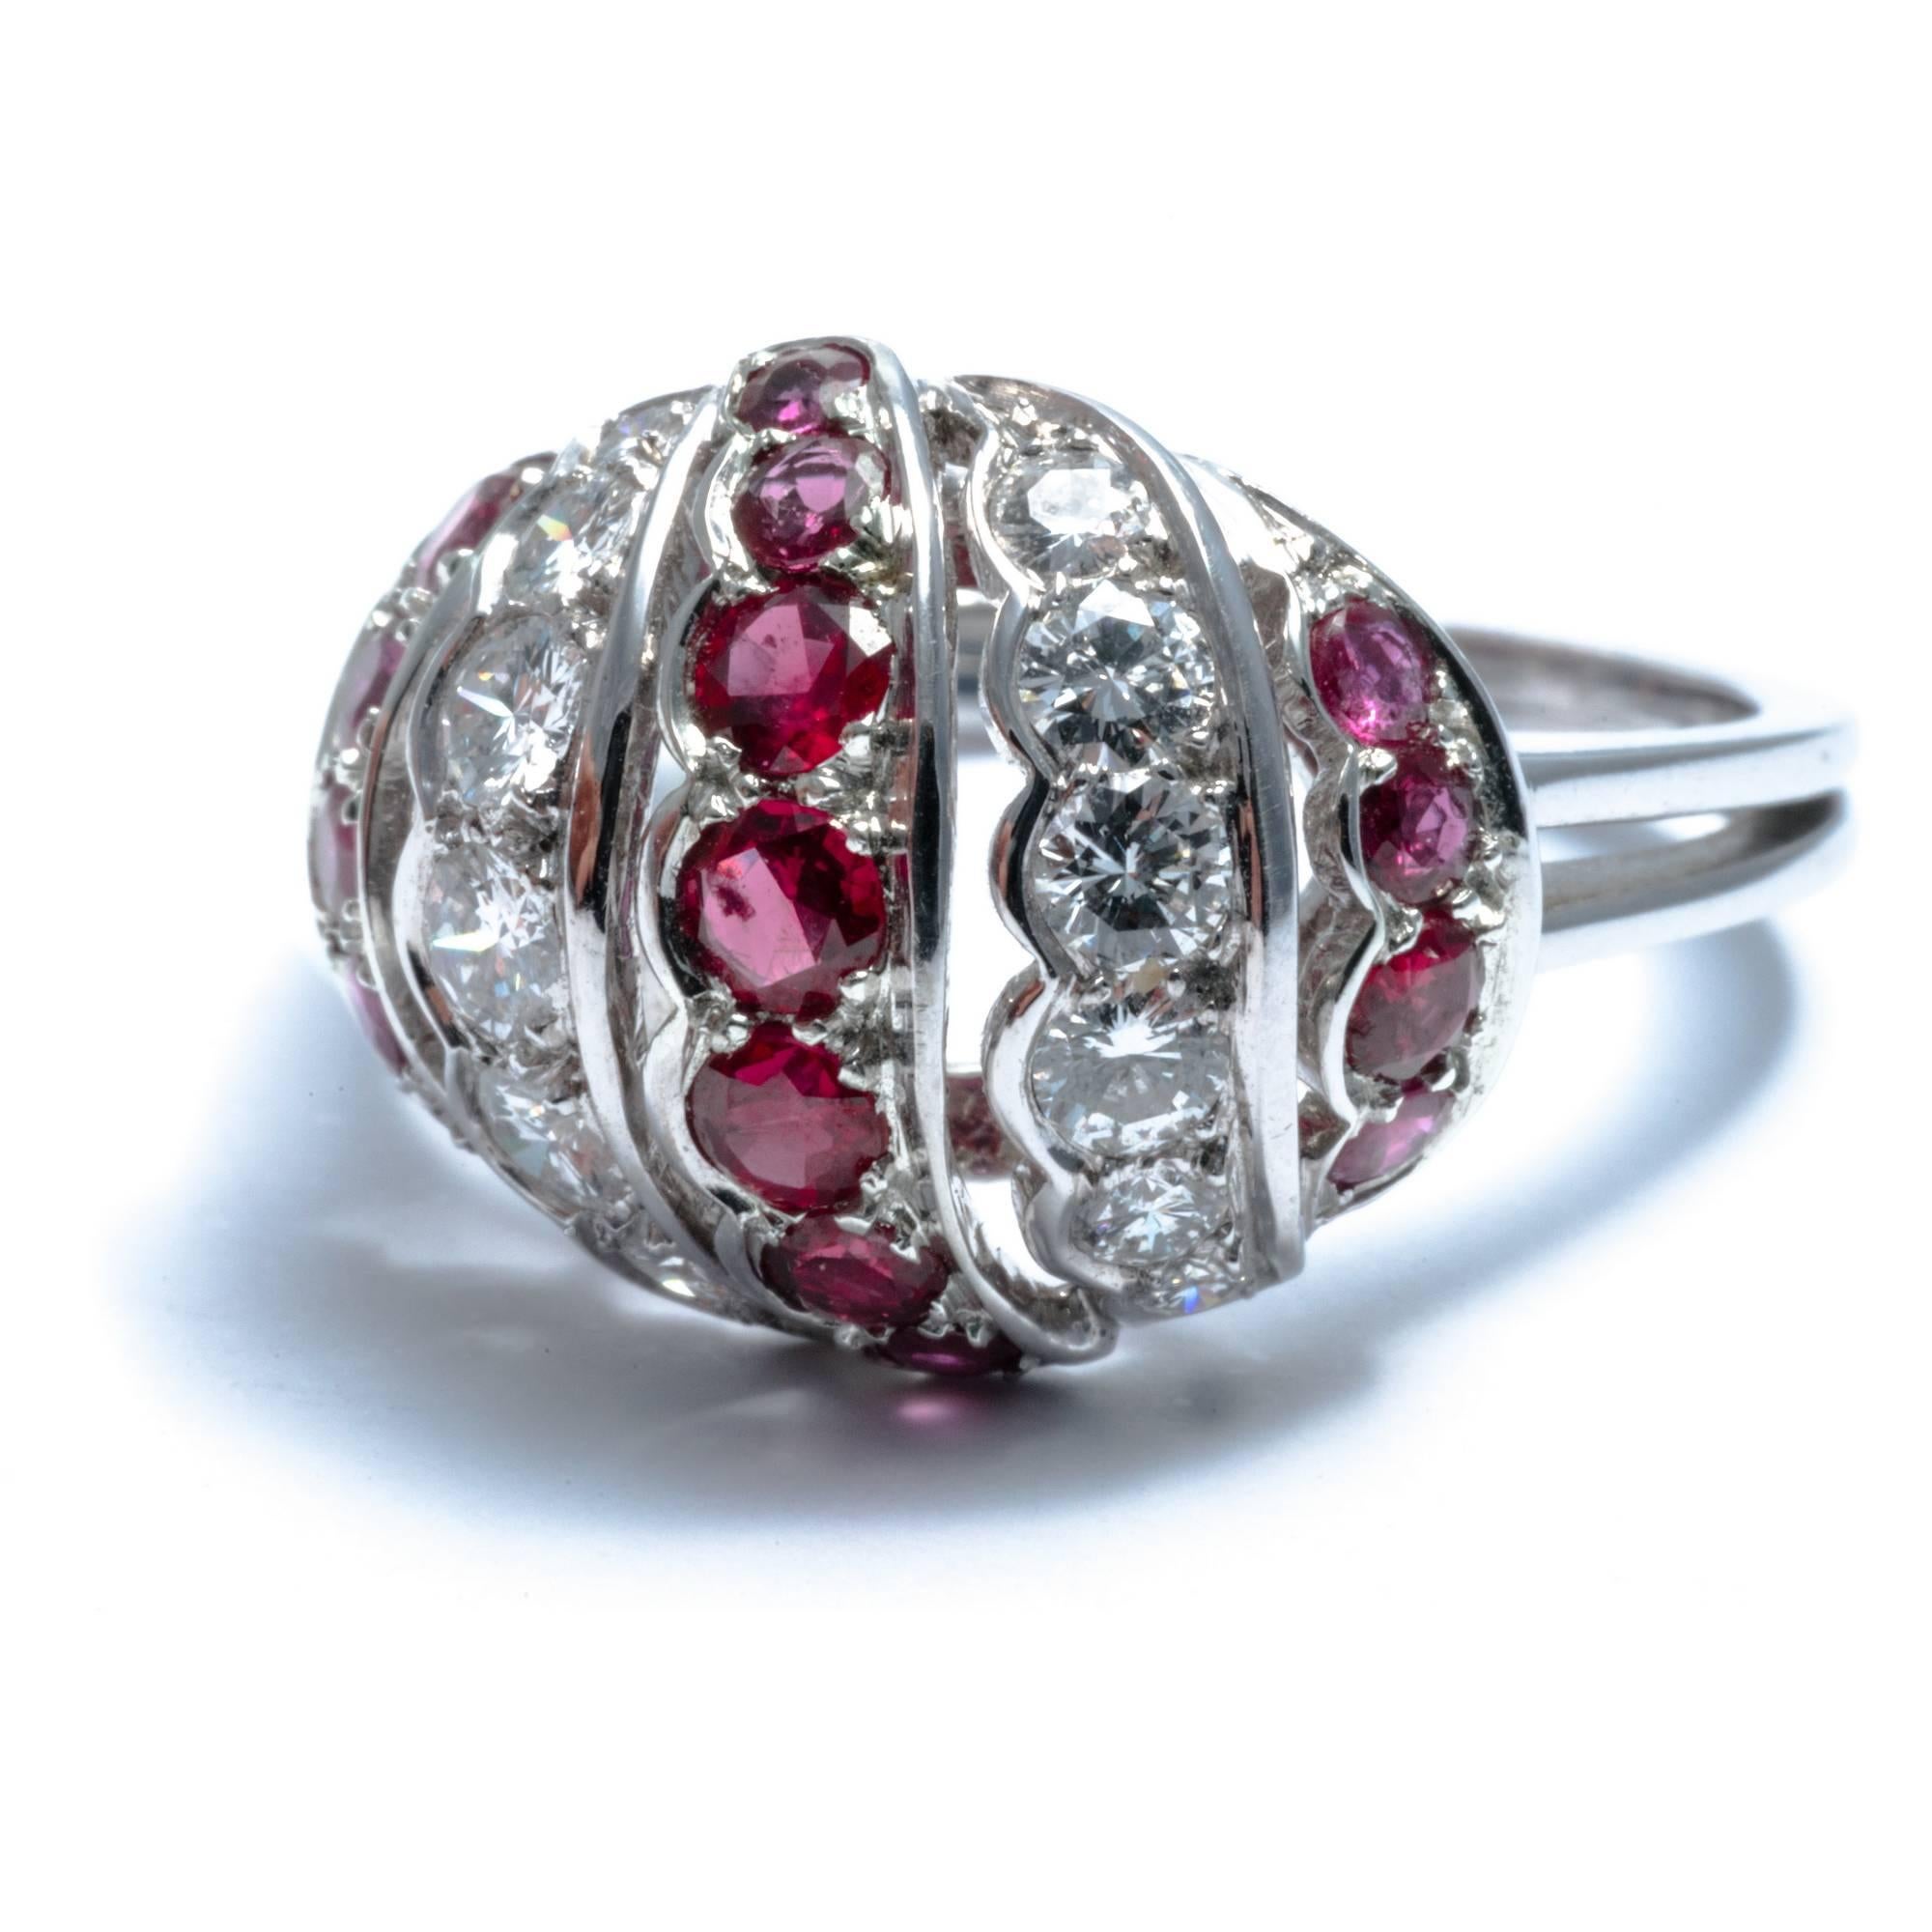  The  whimsical dome shape of this diamond and ruby cocktail ring features  5 sinuous rows of precious stones. Hand-crafted by Ansuini in white gold in 1950's,  approximate diamond total weight is carats 0.60;  approximate rubies total weight is